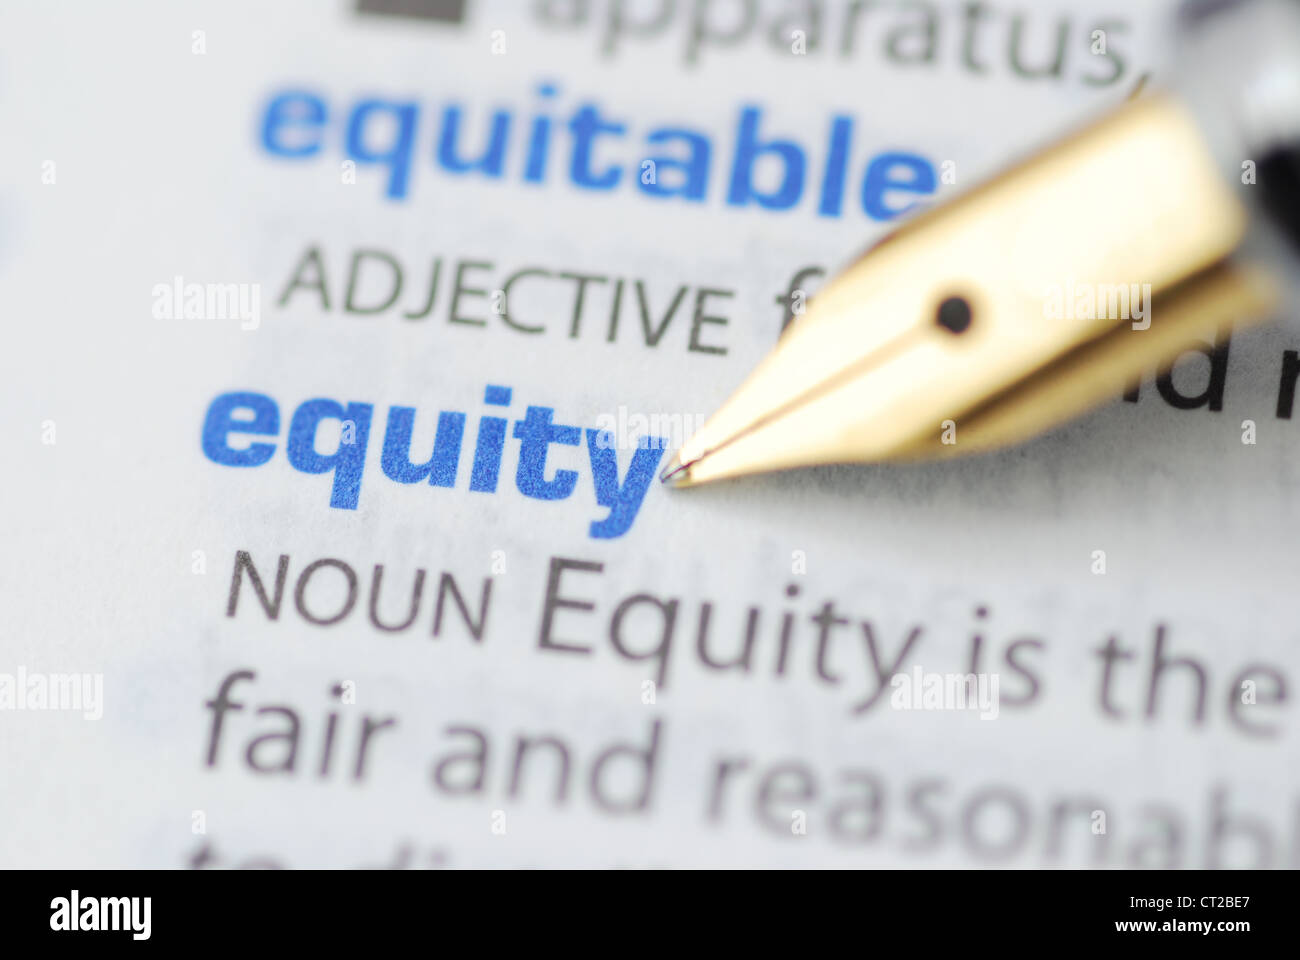 Equity - Dictionary Series Stock Photo